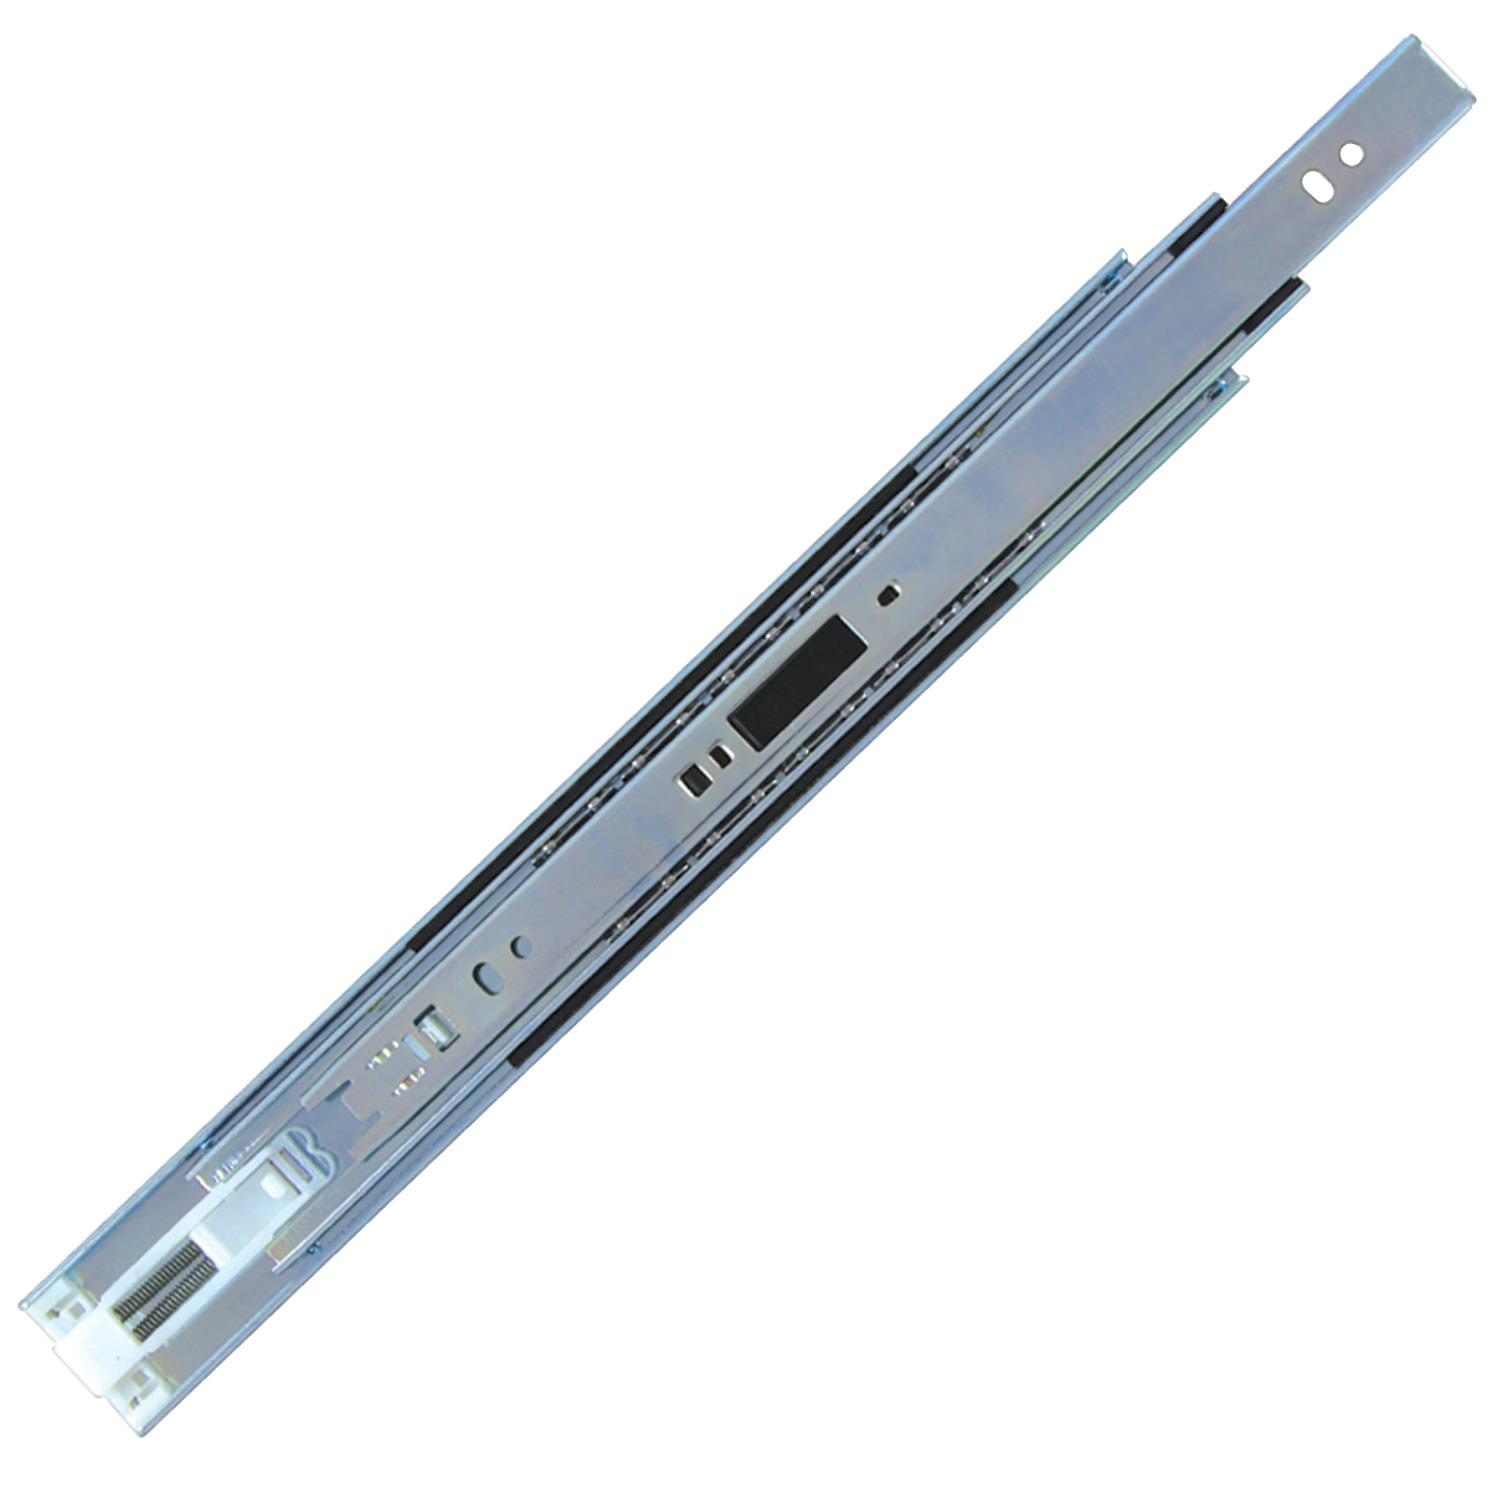 P4050.AC0550 Drawer Slide Full Extn Length 550; Load 30kg per pair. Sold Individually. Lever Disconnect; Soft Close